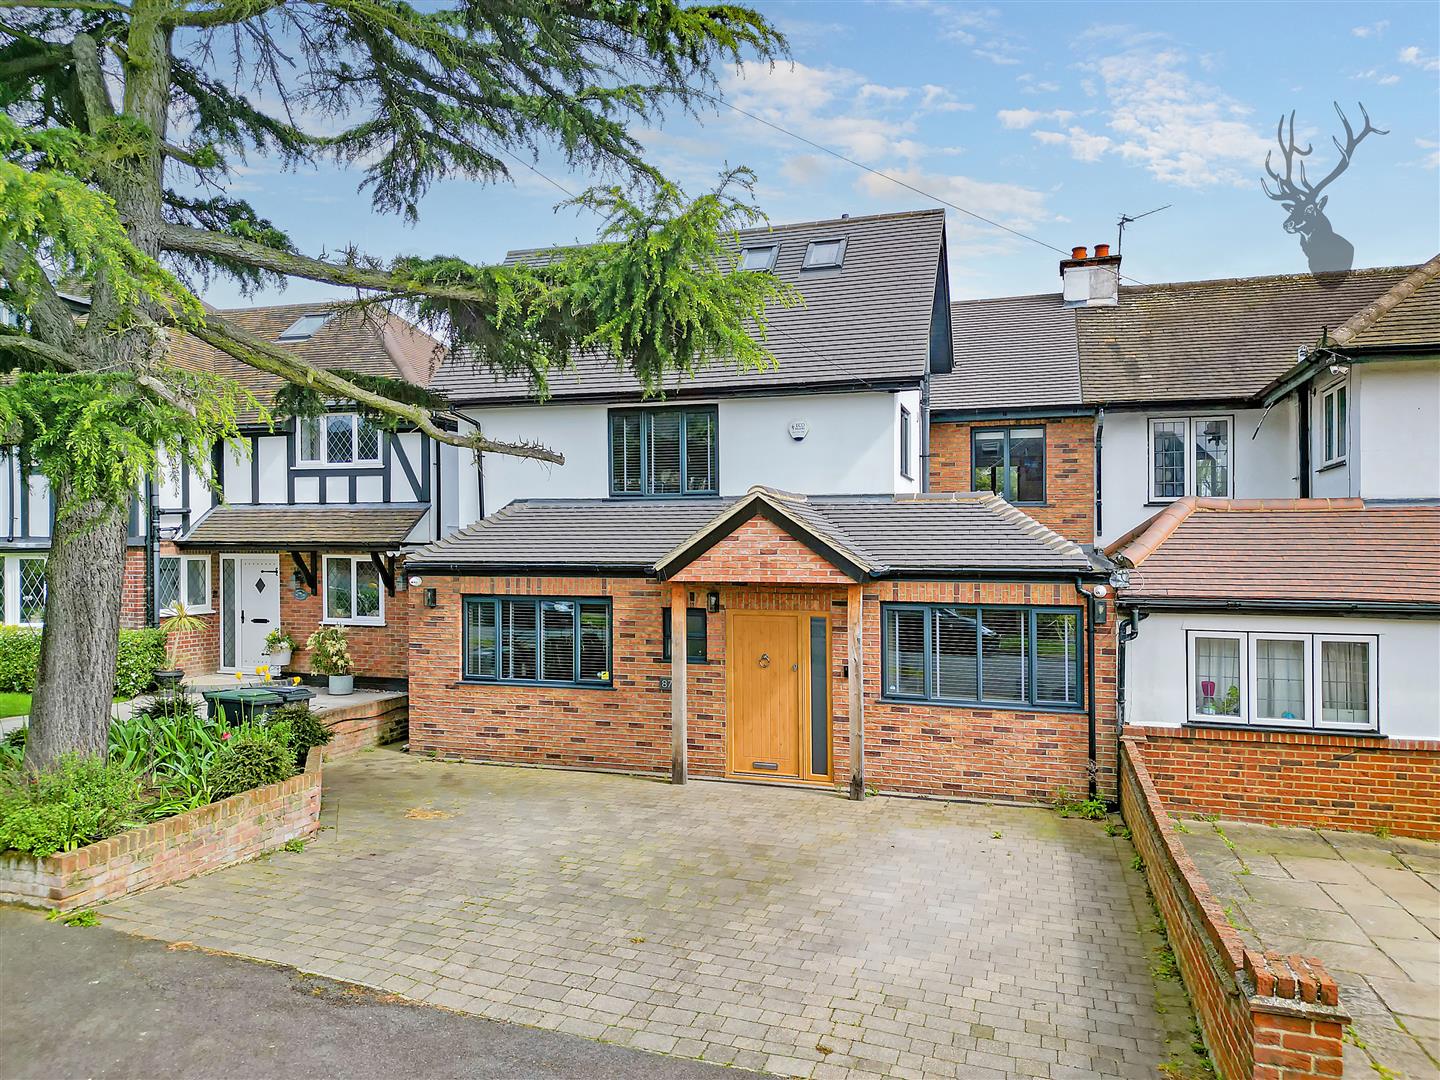 Similar Property: House in Chigwell